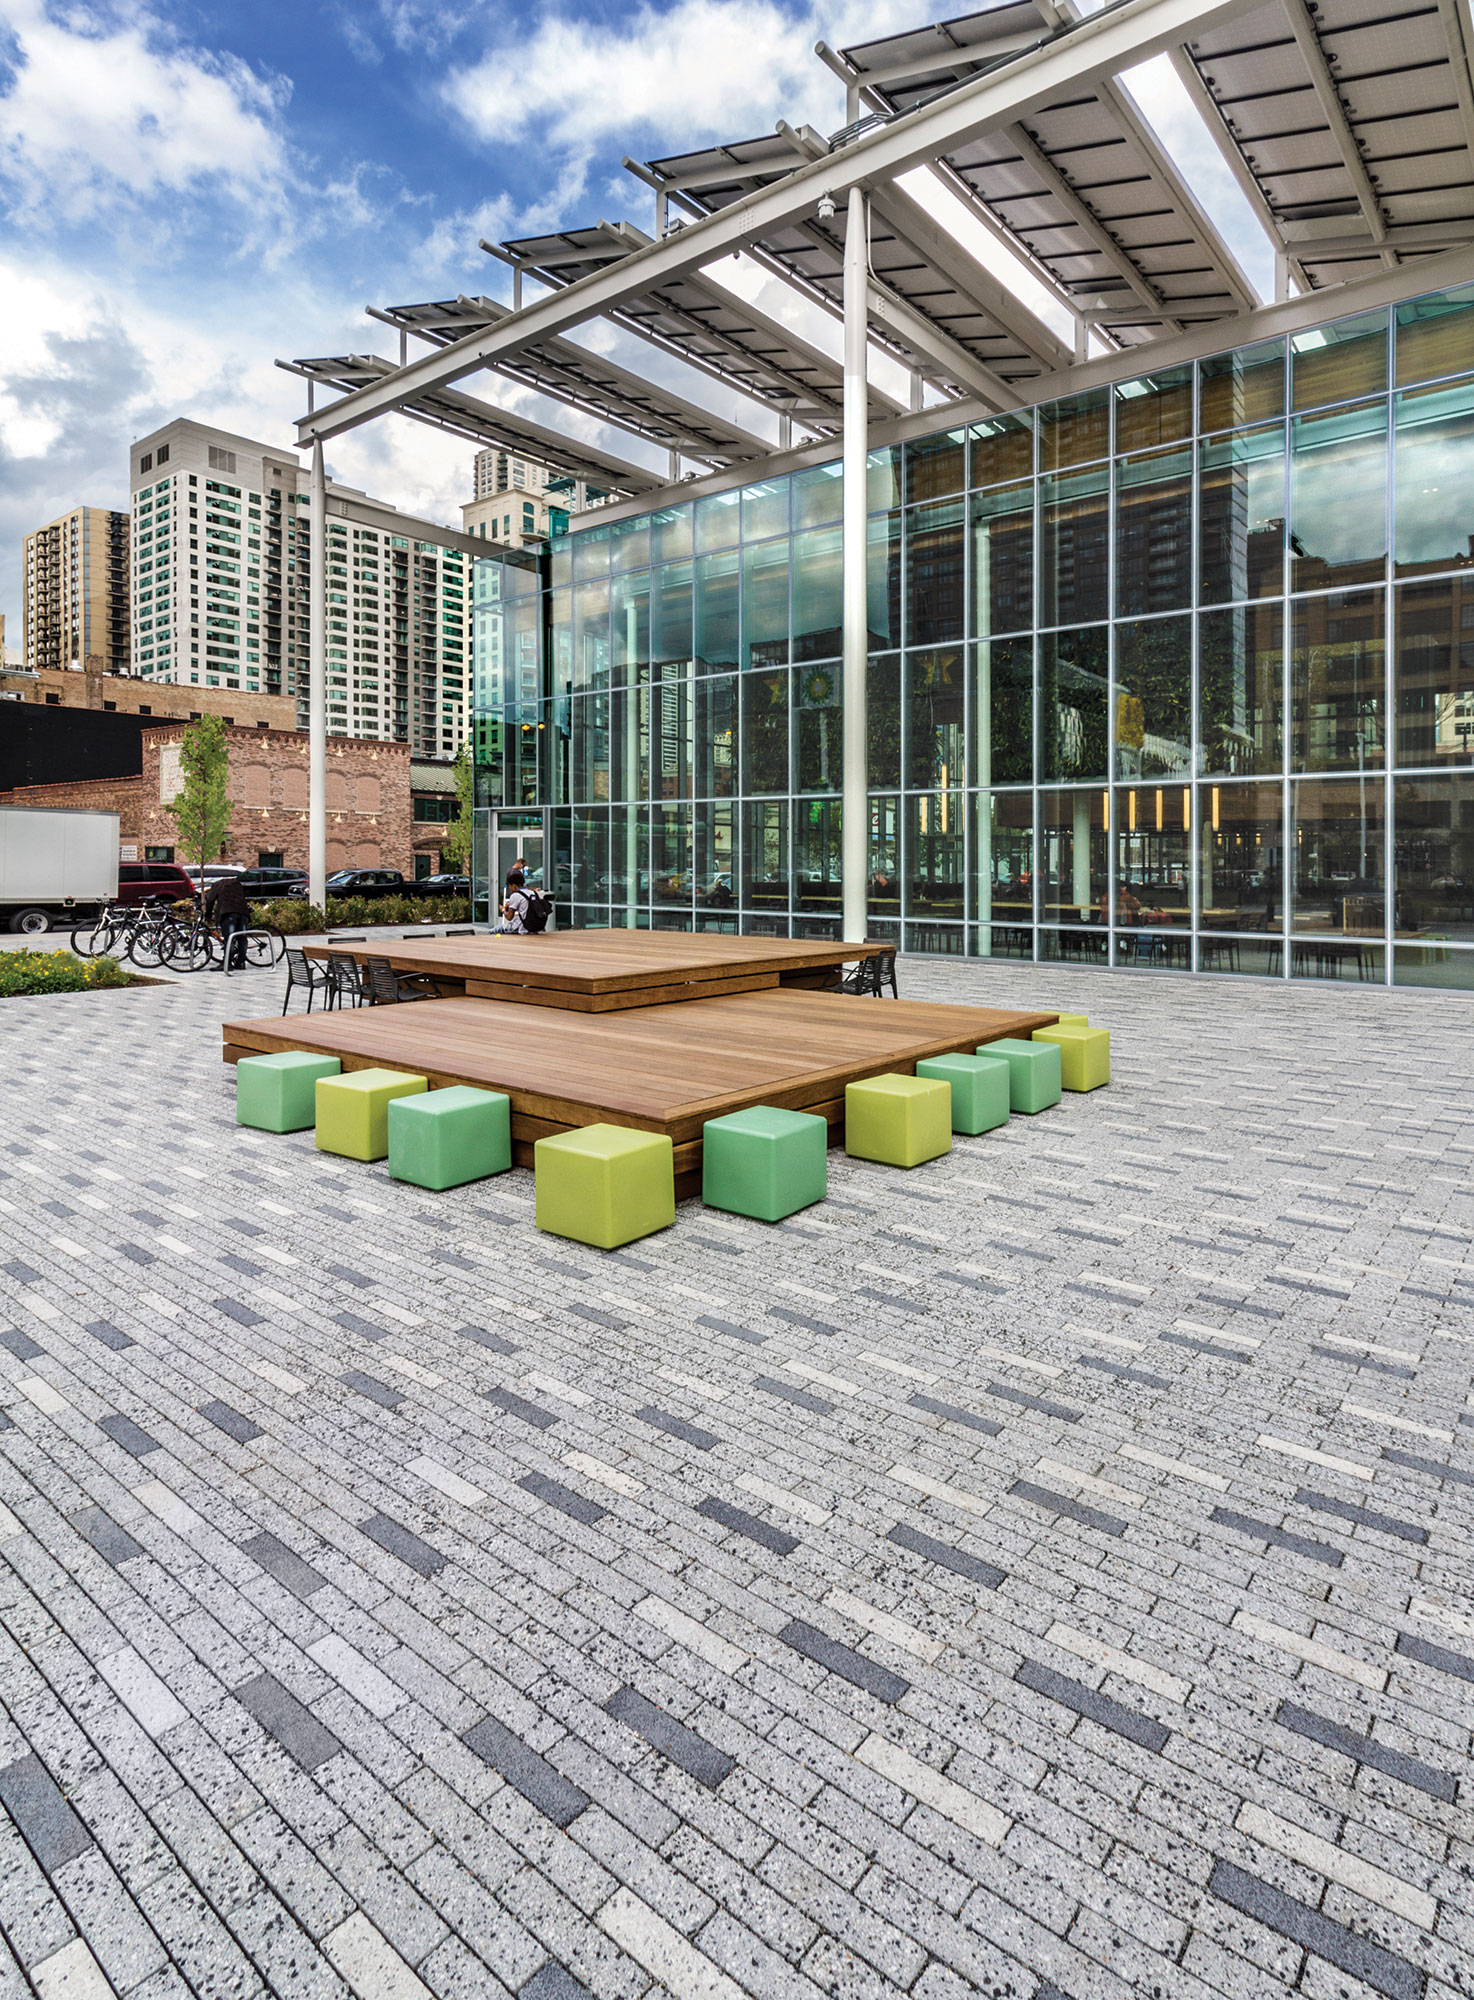 Eco-Promenade permeable pavers in different tones from white to dark grey with a speckled finish hold colorful seating blocks and tables.